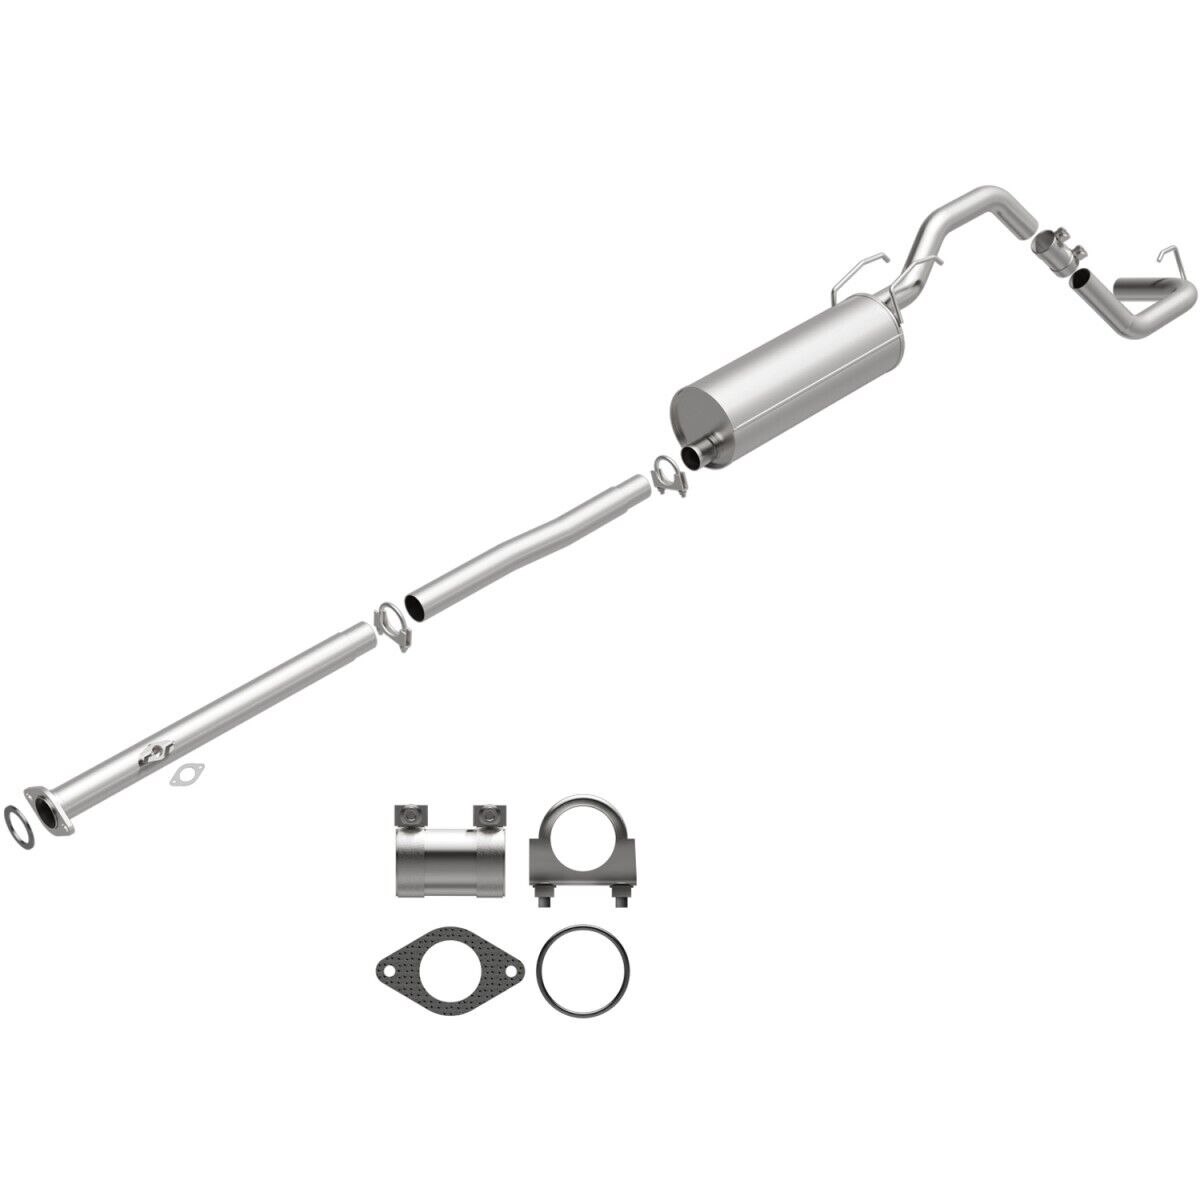 106-0240 BRExhaust Exhaust System for Toyota Tacoma 1996-2000